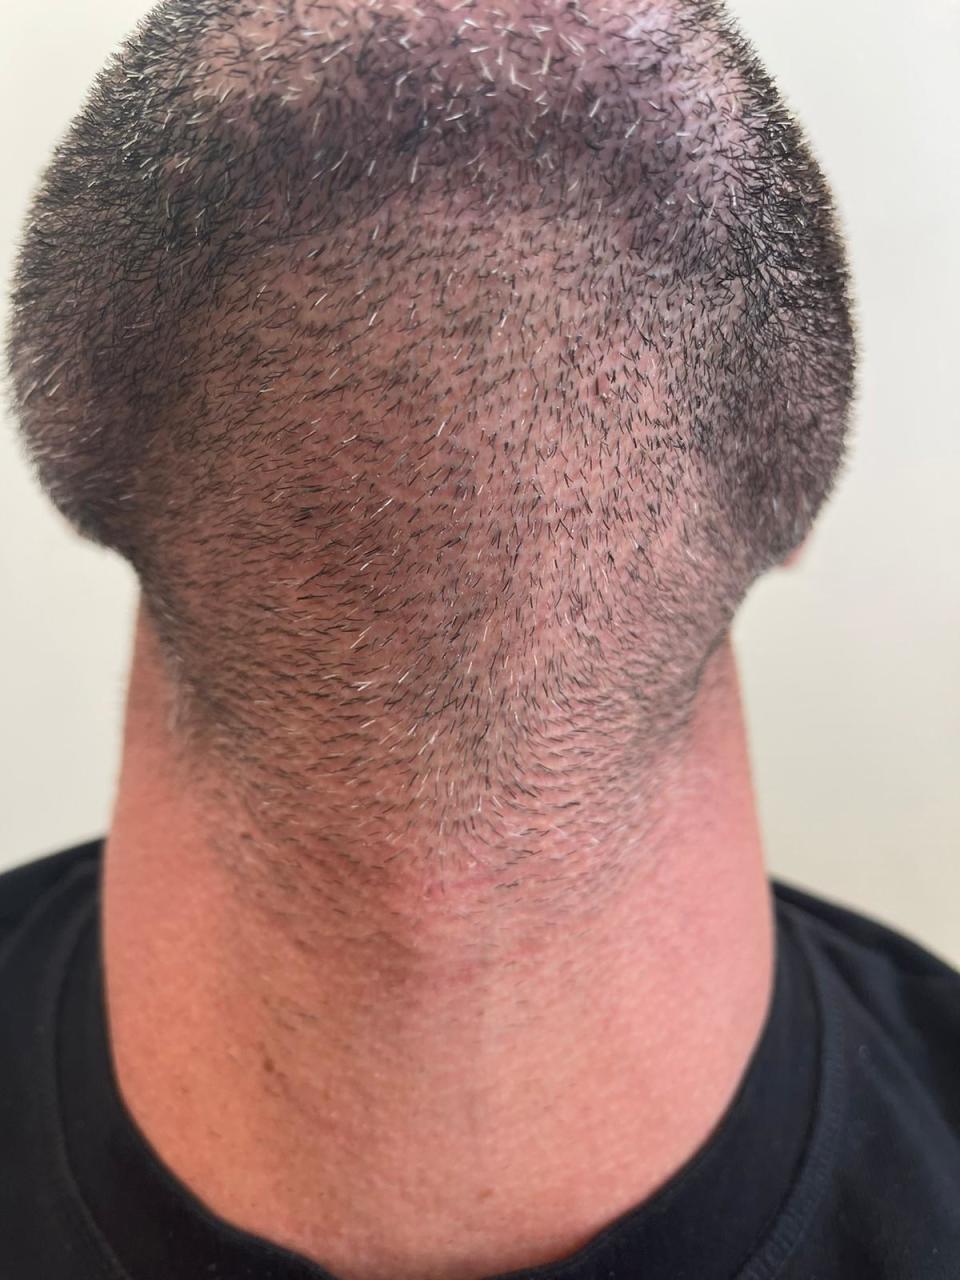 Calum Best’s neck where donor hair was extracted for his hair transplant with the neck scars fully healed two weeks after his hair transplant (Vincent Cole)